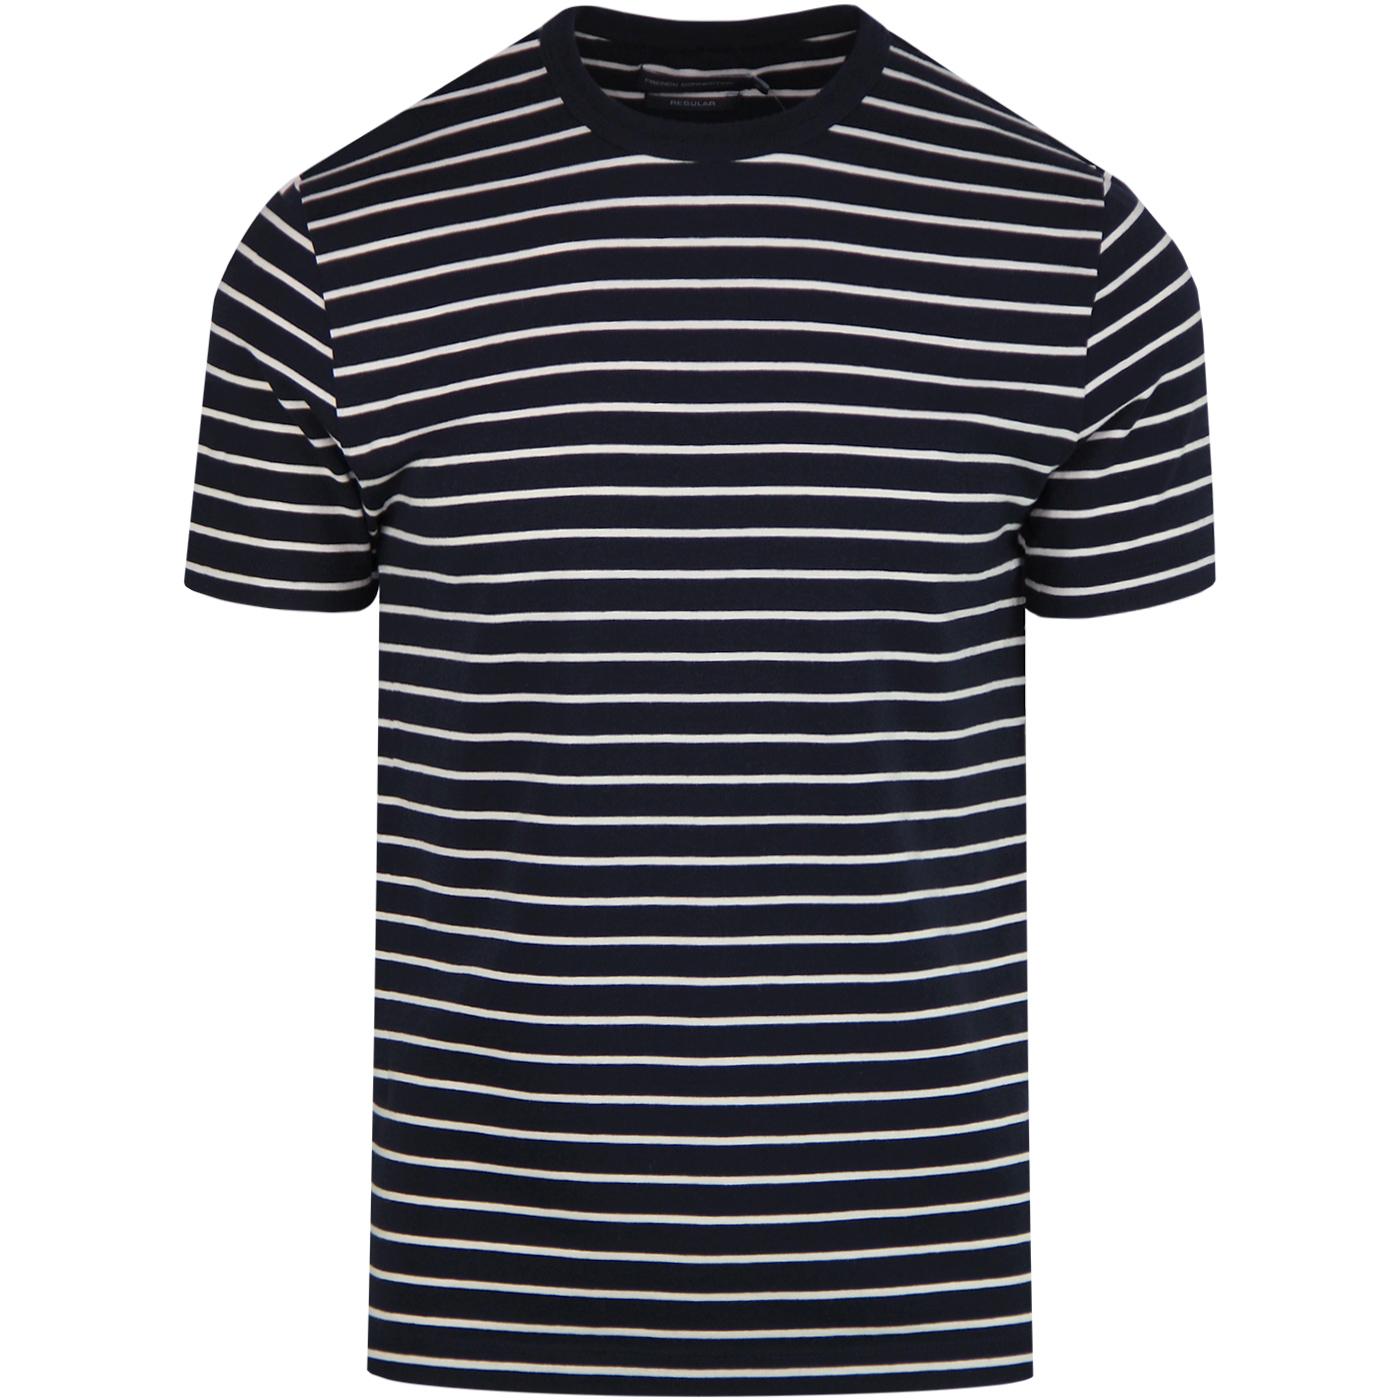 FRENCH CONNECTION Retro Mod Stripe Crew T-shirt in Navy